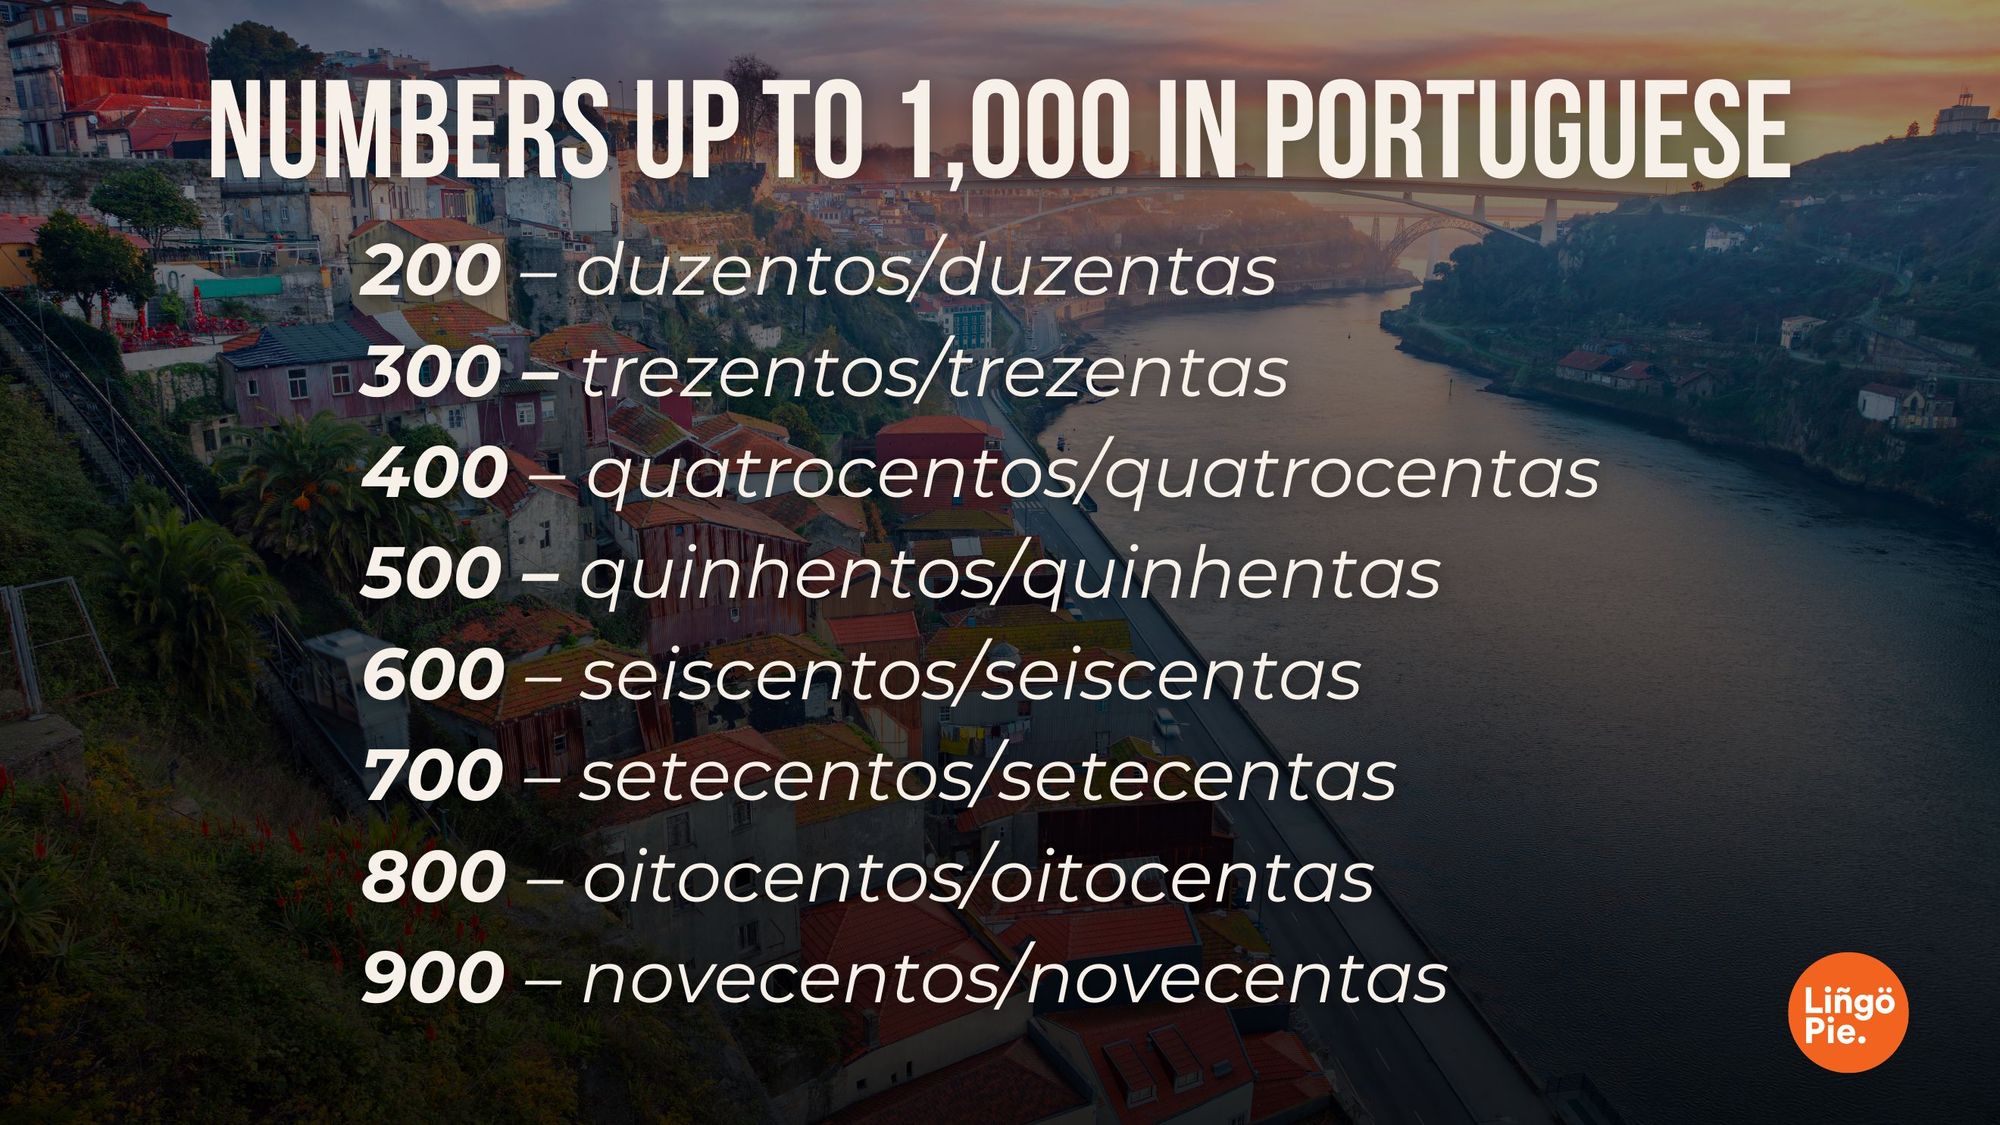 Numbers up to 1,000 in Portuguese